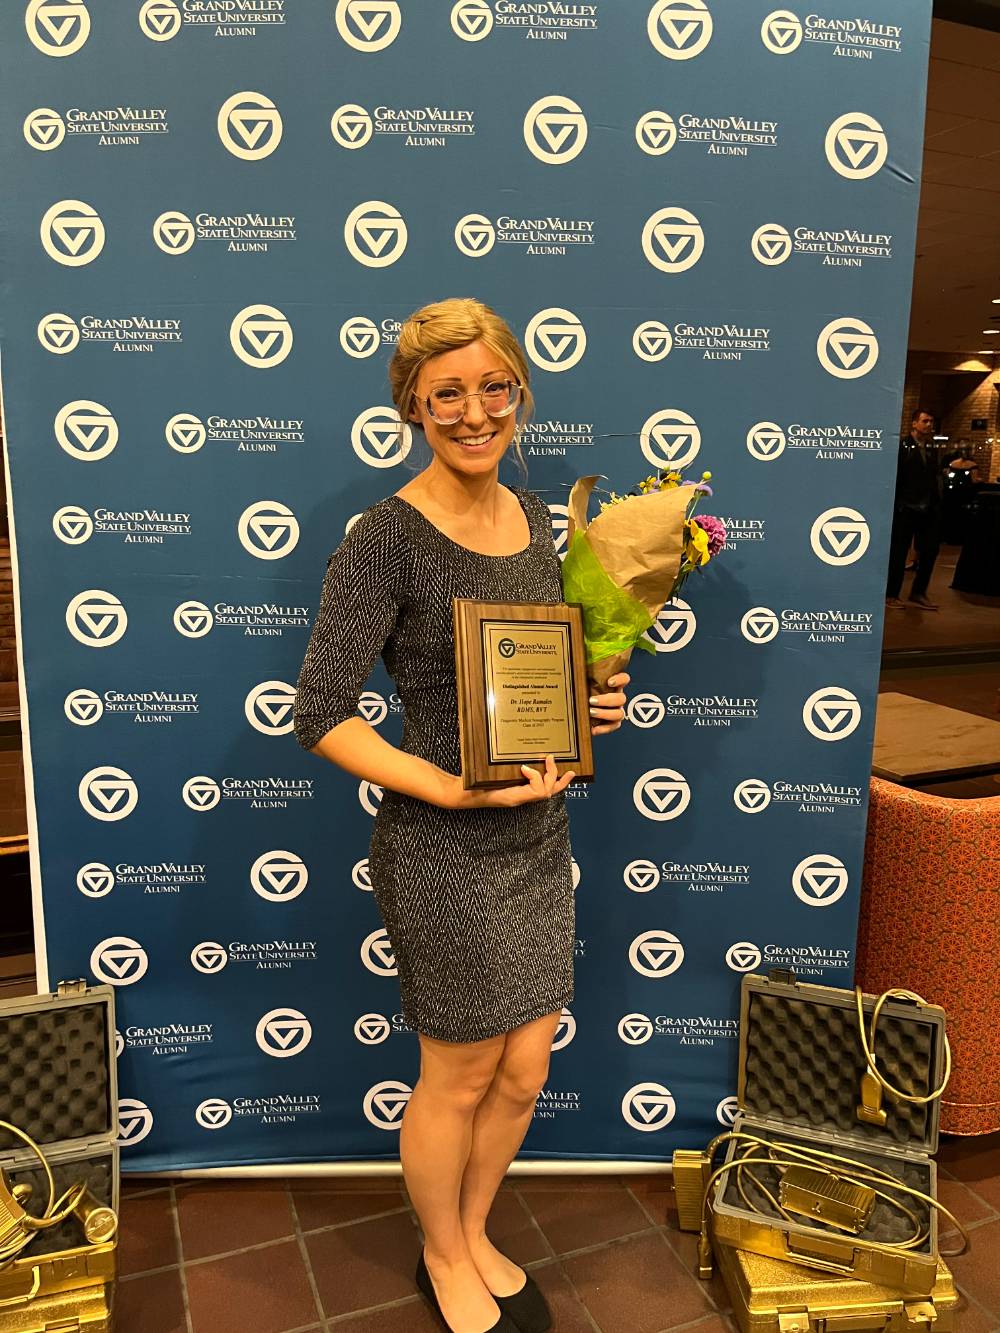 Alum standing in front of the GV Alumni Relations backdrop with an award and flowers.